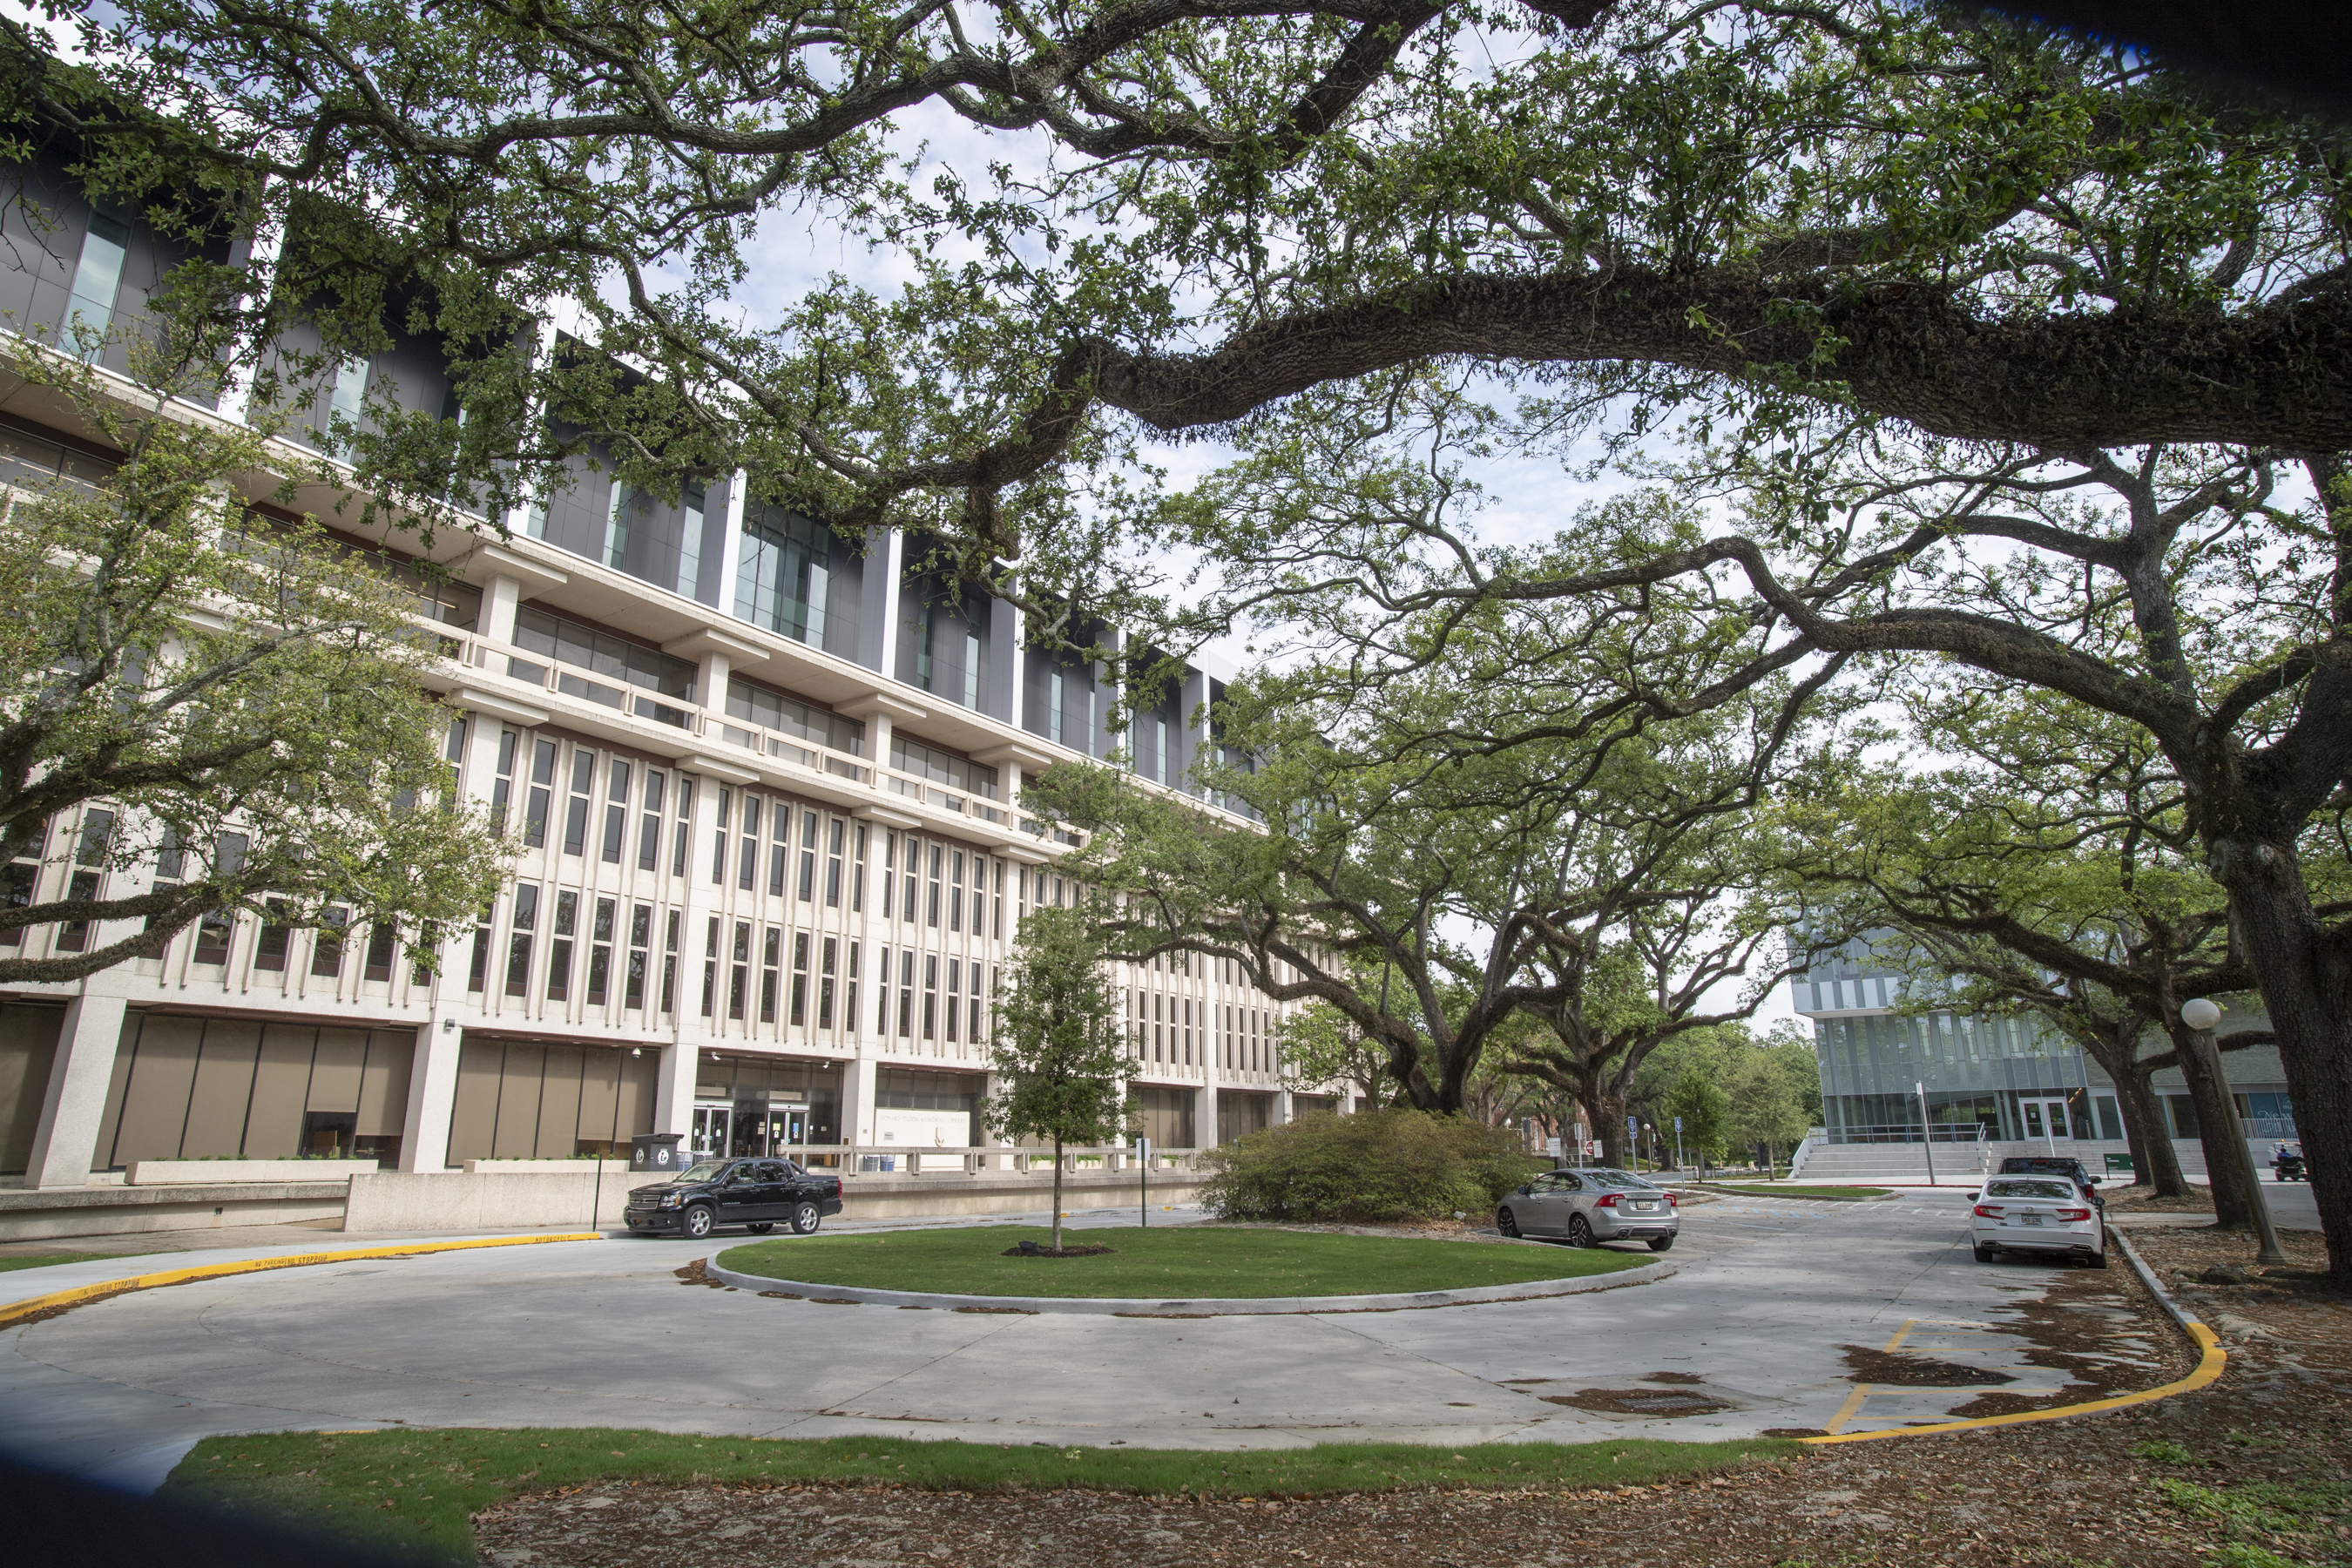 The entrance to Howard Tilton Memorial Library is to the left of a roundabout. Oak trees are on the neutral ground. A ramp leads up to the entrance to the library.